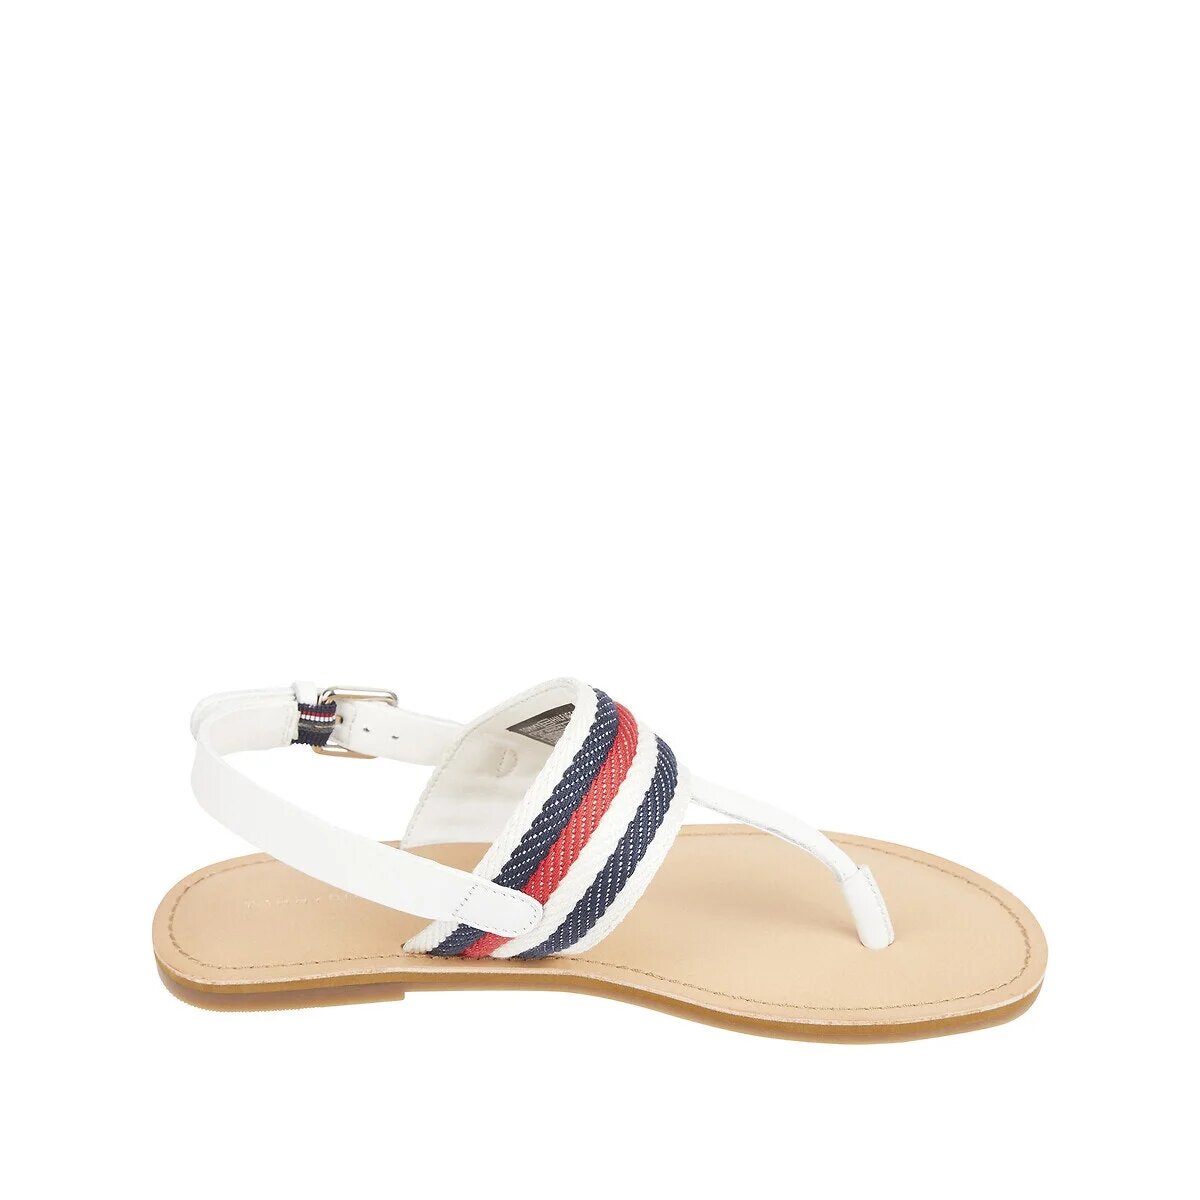 Women’s sandals with soles by Tommy Hilfiger